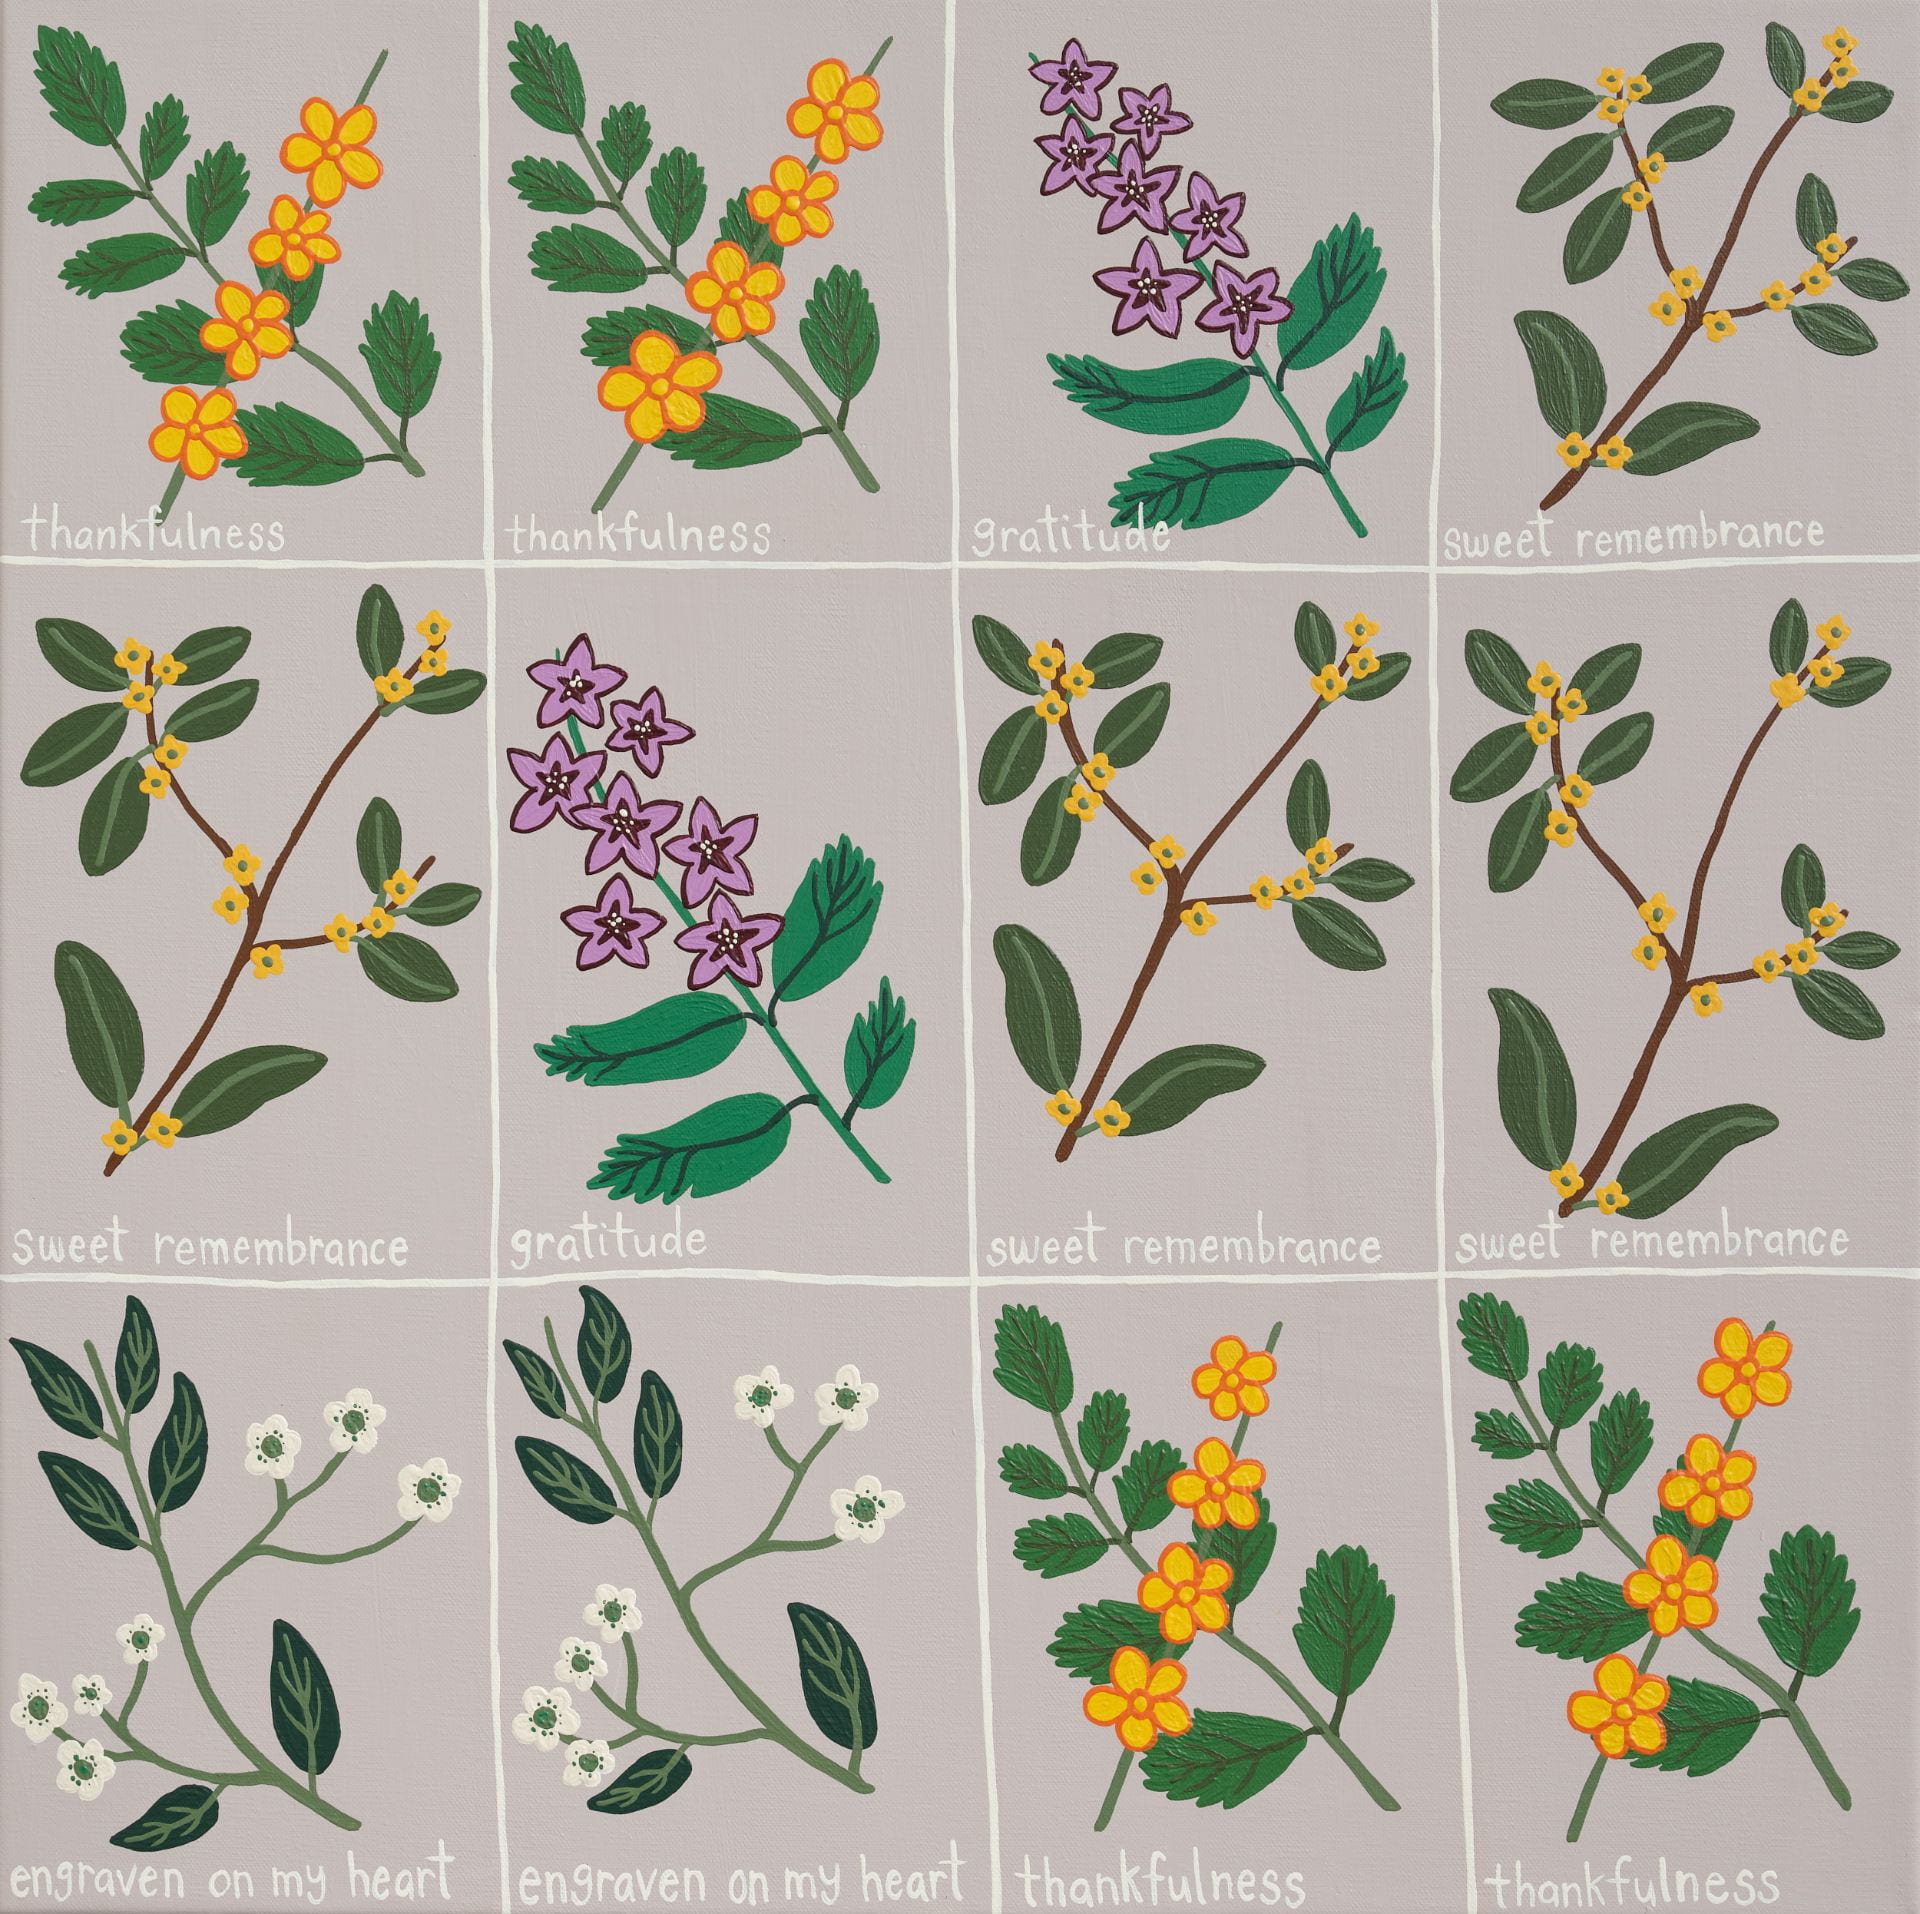 A 4 by 4 grid of flowers, with writing under each flower stating their symbolic meaning. Four yellow-orange flowers represent thankfulness. Two purple flowers represent gratitude. Four dainty yellow flowers represent sweet remembrance. Two dainty white flowers represent engraven on my heart. The flowers are laid out across each grid like a bouquet split into its individual parts.